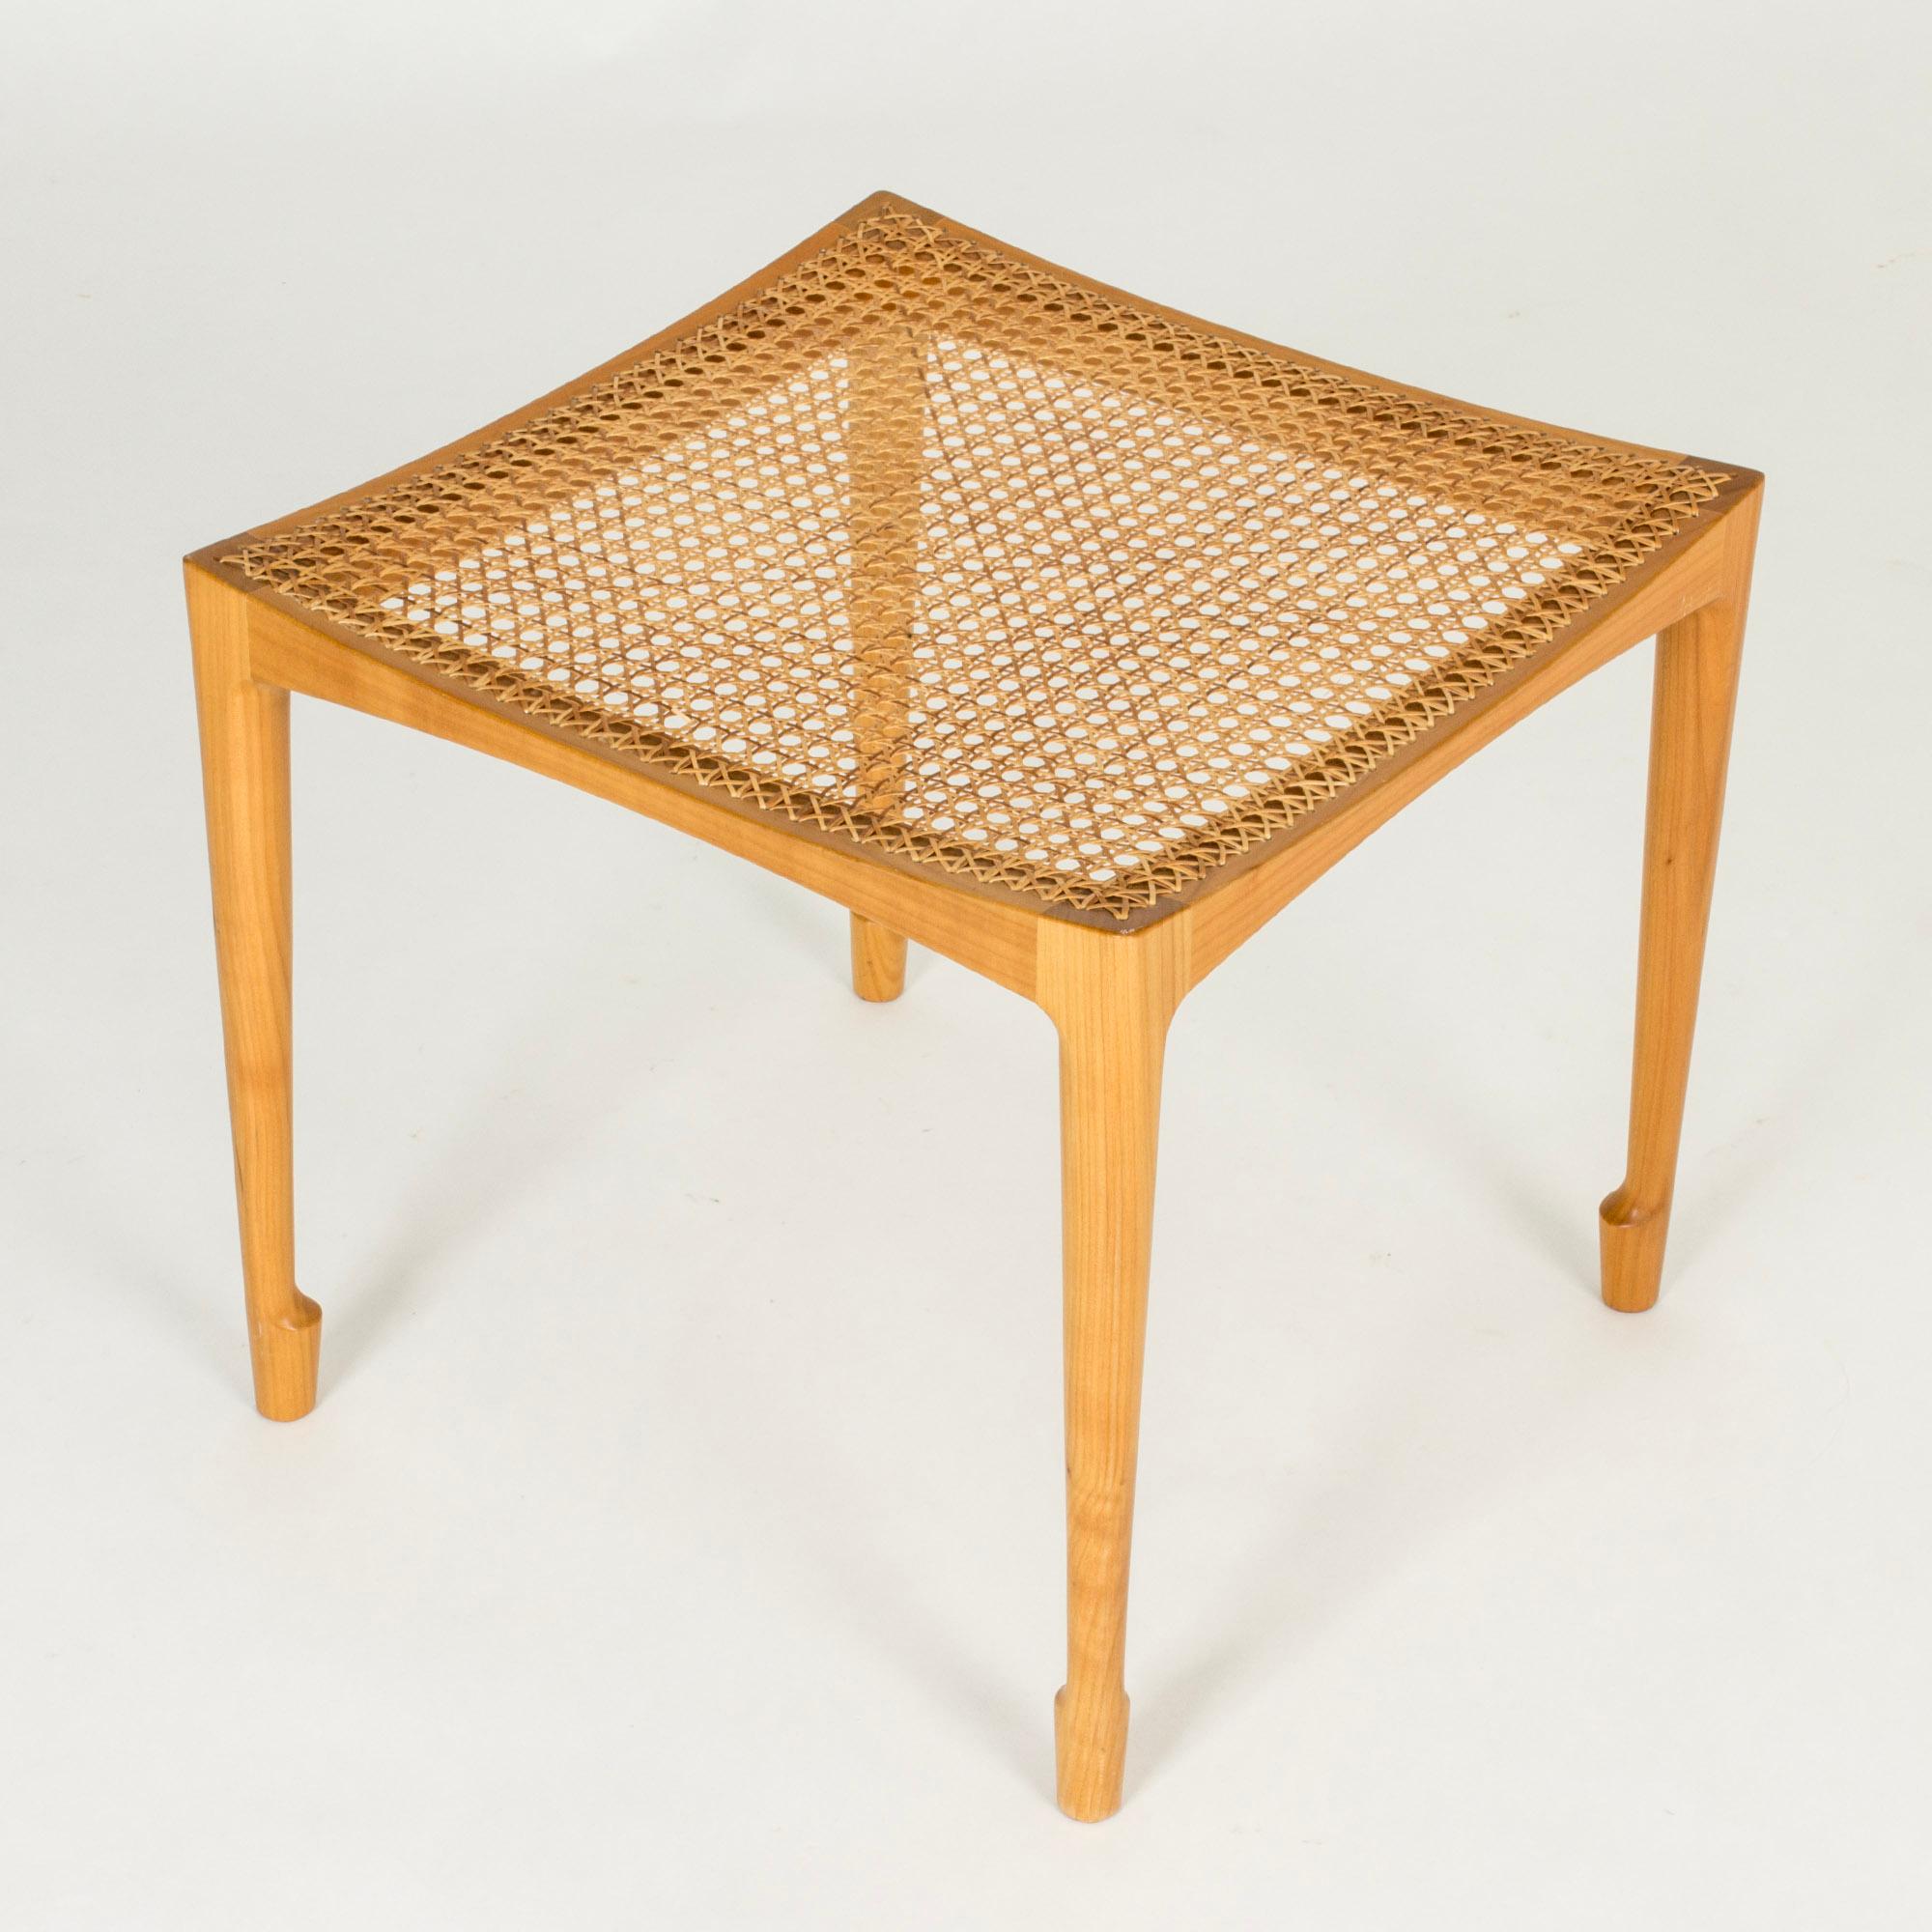 Scandinavian Modern Birch and Rattan Stools by Bernt Petersen, Denmark, 1950s In Good Condition For Sale In Stockholm, SE